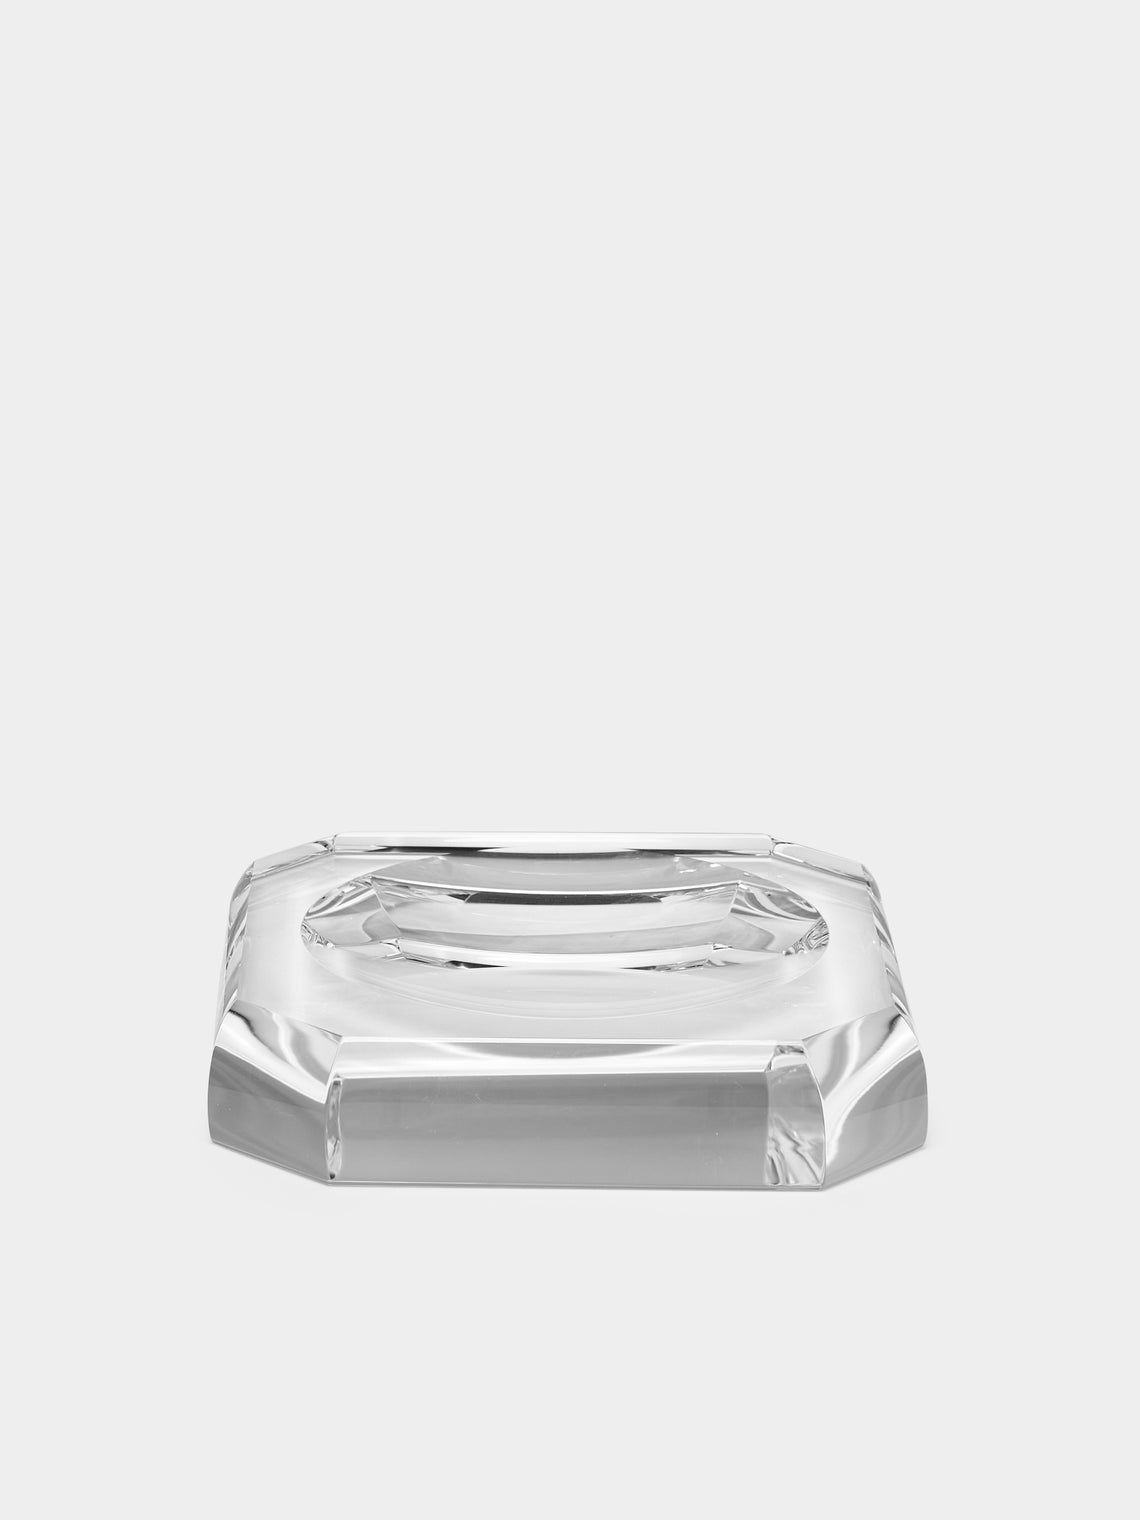 Decor Walther - Cut Crystal Soap Dish -  - ABASK - 